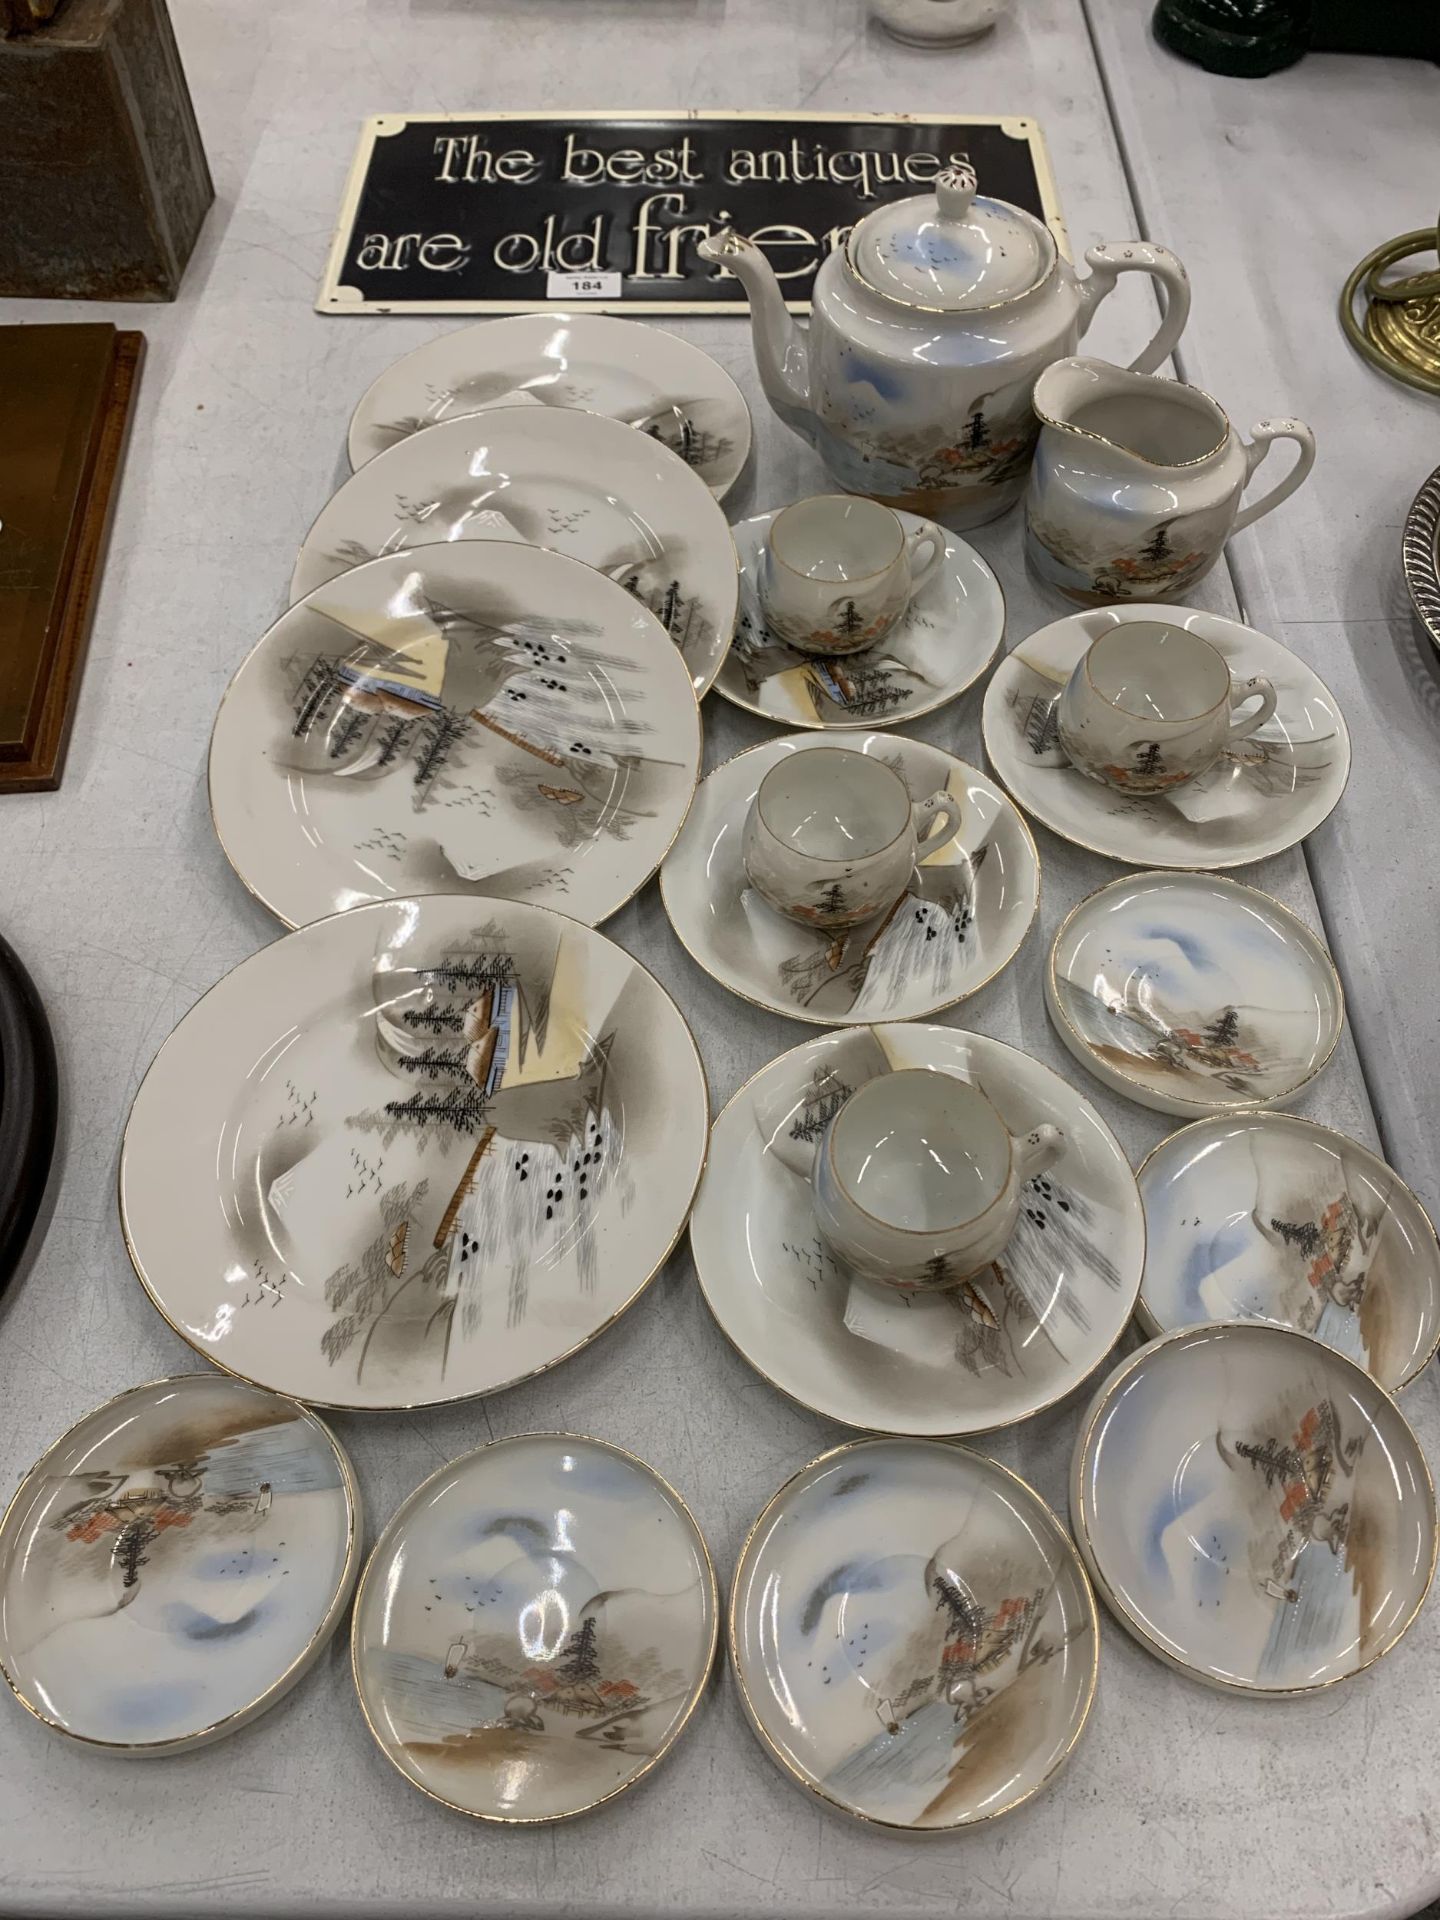 AN ORIENTAL TEASET TO INCLUDE A TEAPOT, CREAM JUG, CUPS, SAUCERS AND PLATES